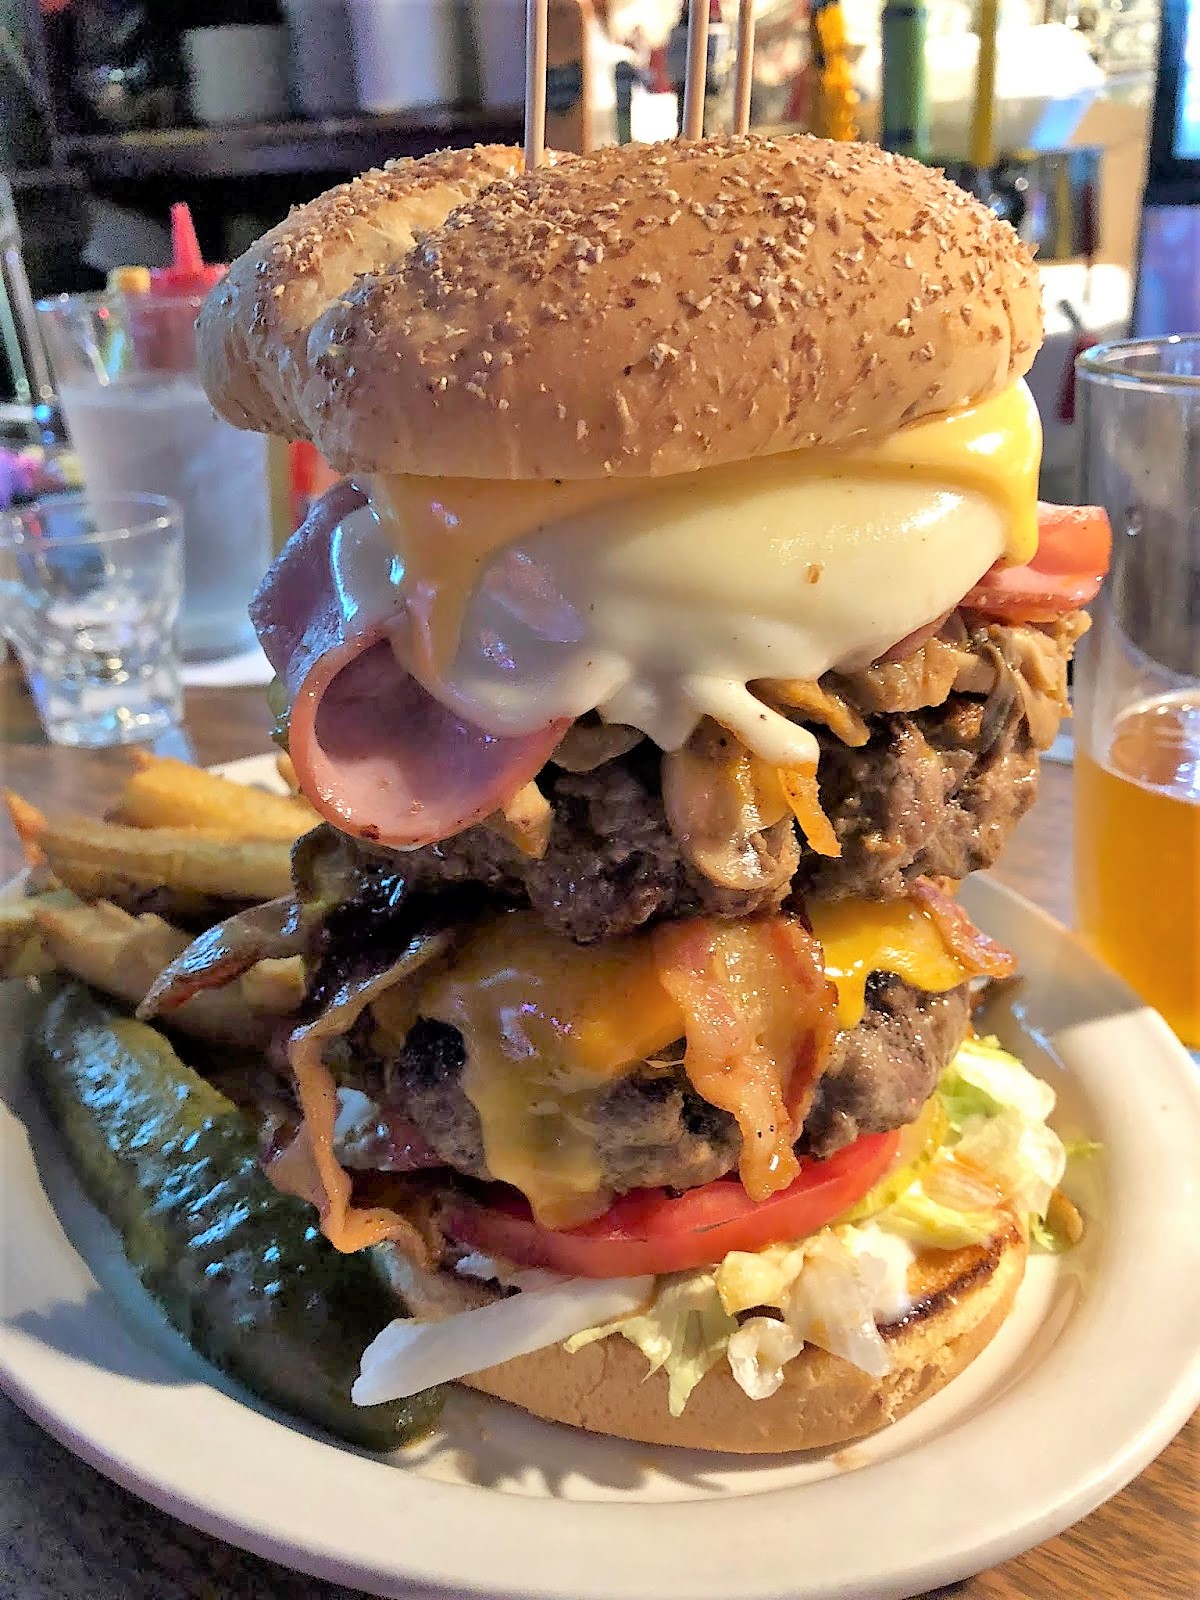 Bill Cianci's (Mostly) Burger Reviews: The Thurman Cafe - Columbus, Ohio